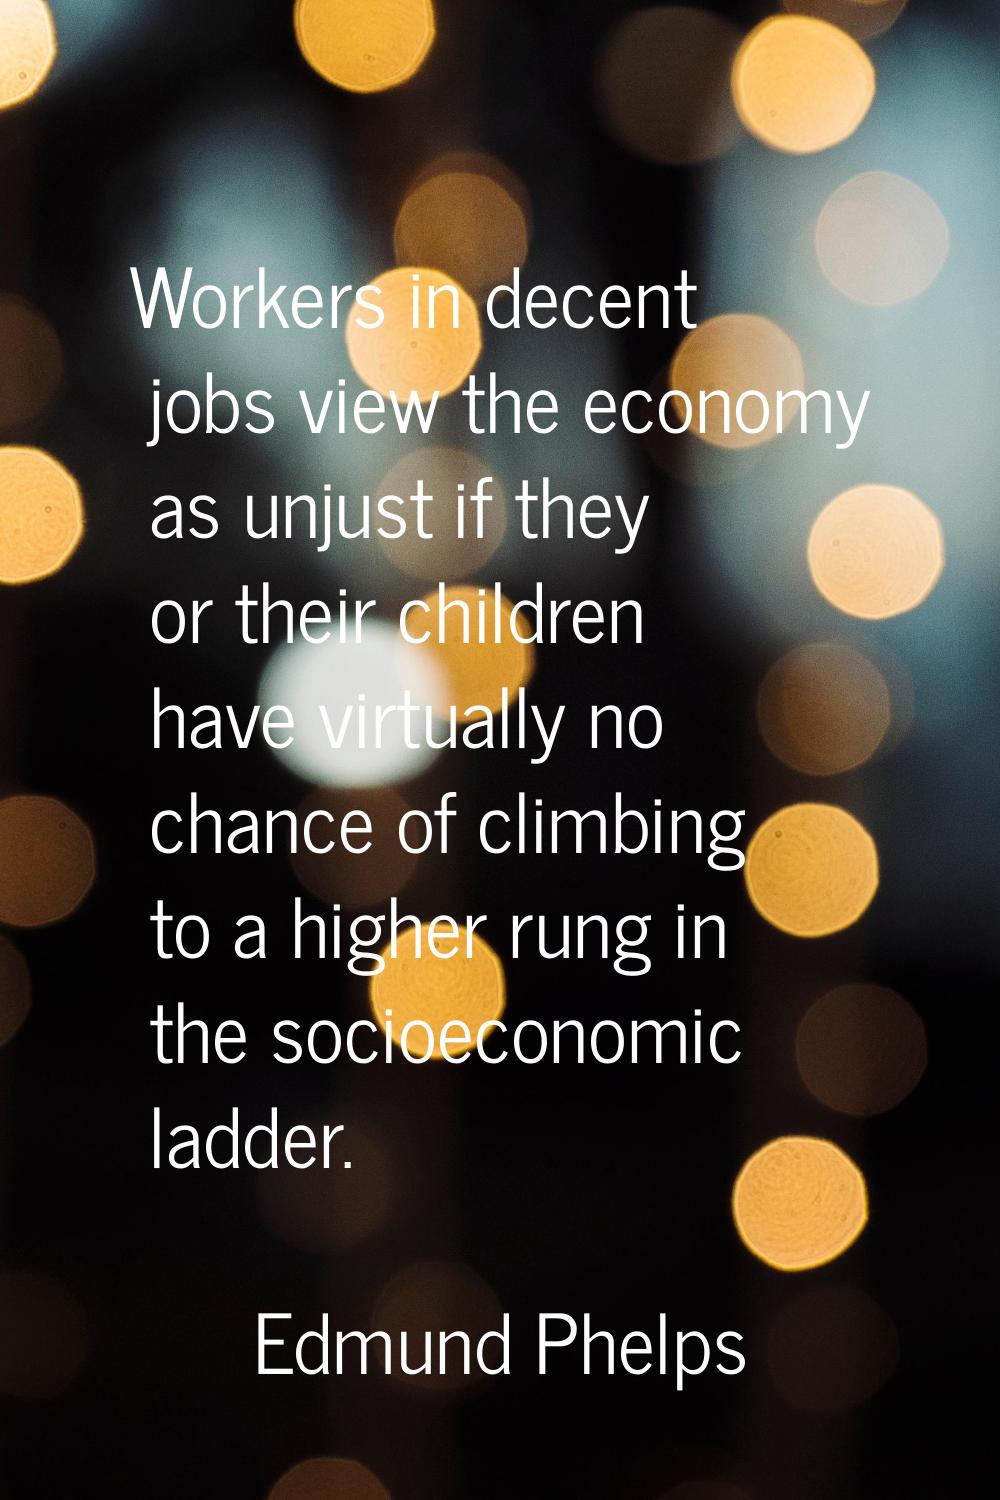 Workers in decent jobs view the economy as unjust if they or their children have virtually no chanc